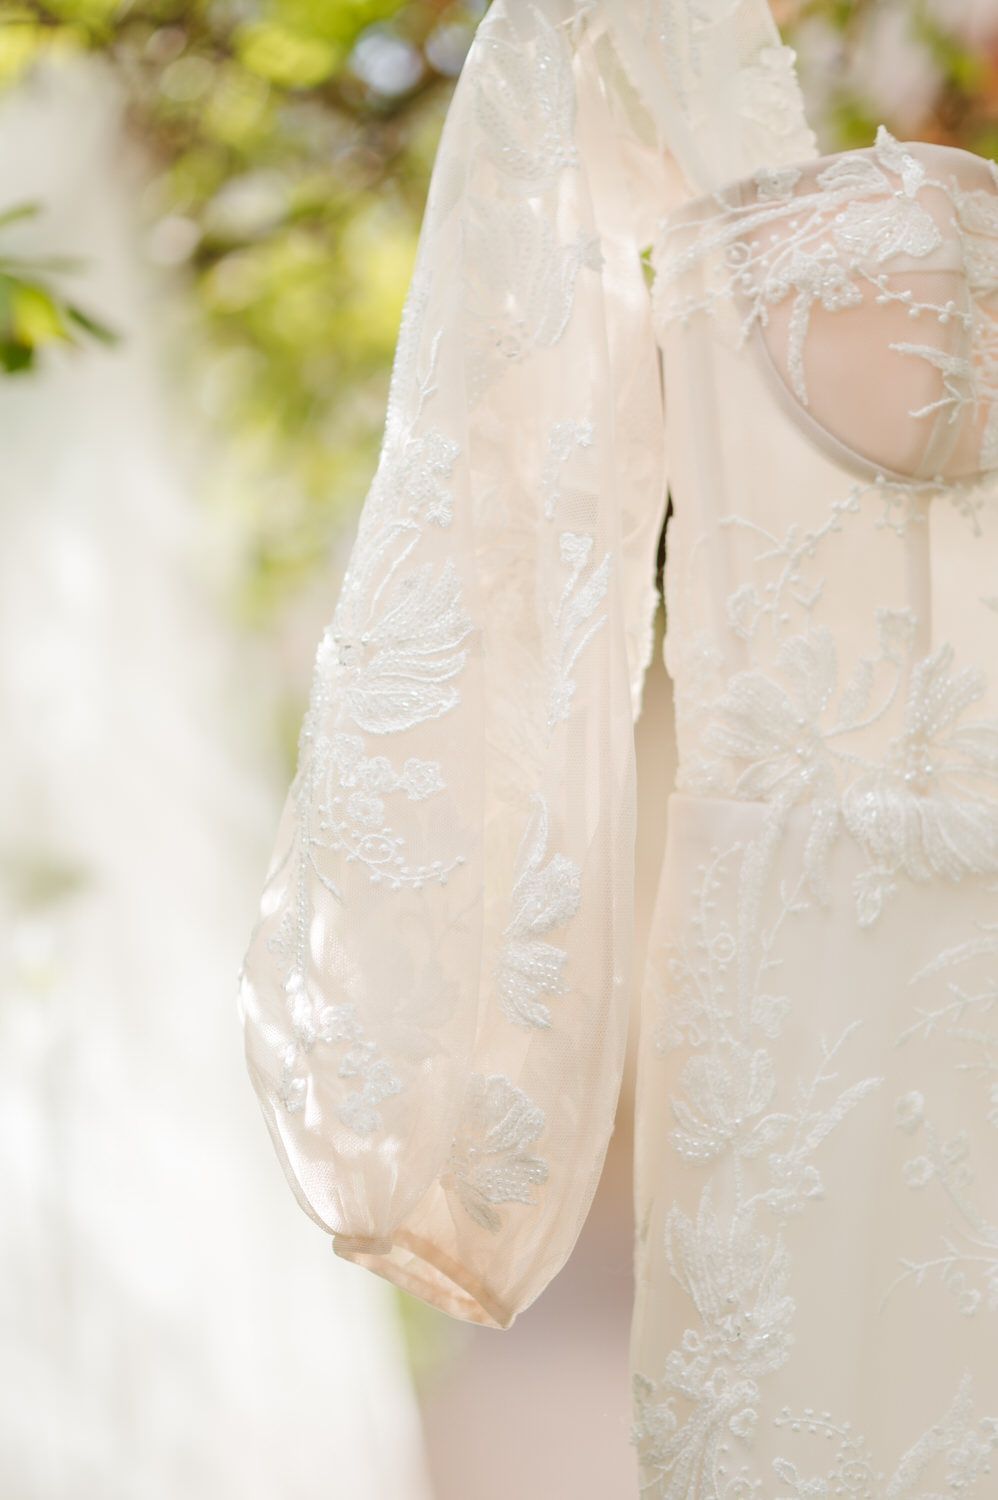 A close up of a white lace dress hanging on a hanger.